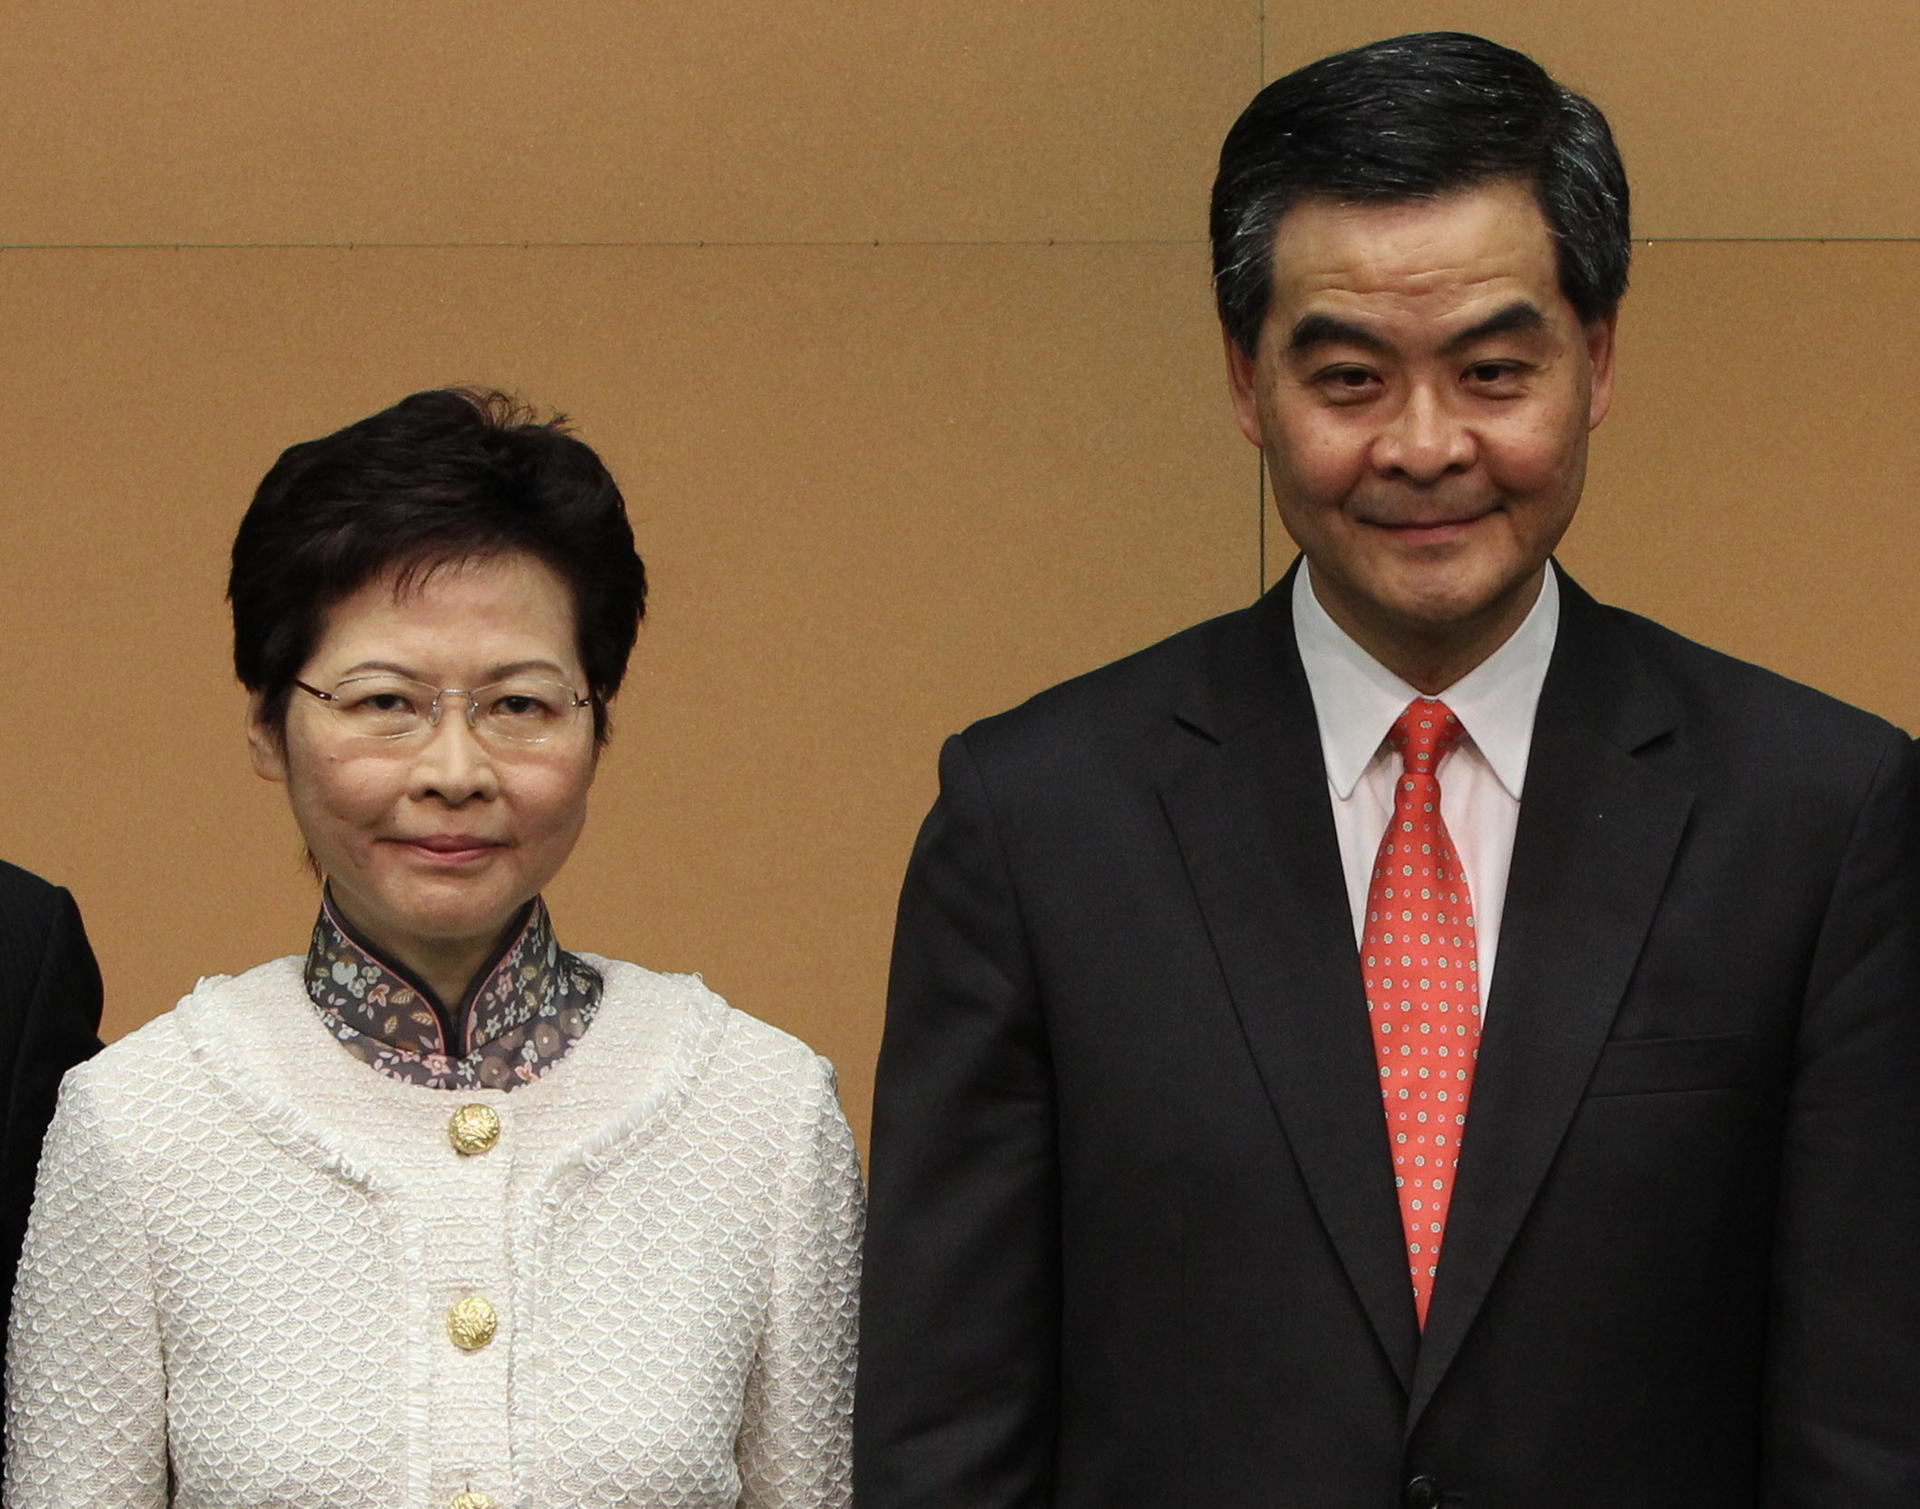 Carrie Lam and CY Leung deny there is tension. Photo: David Wong